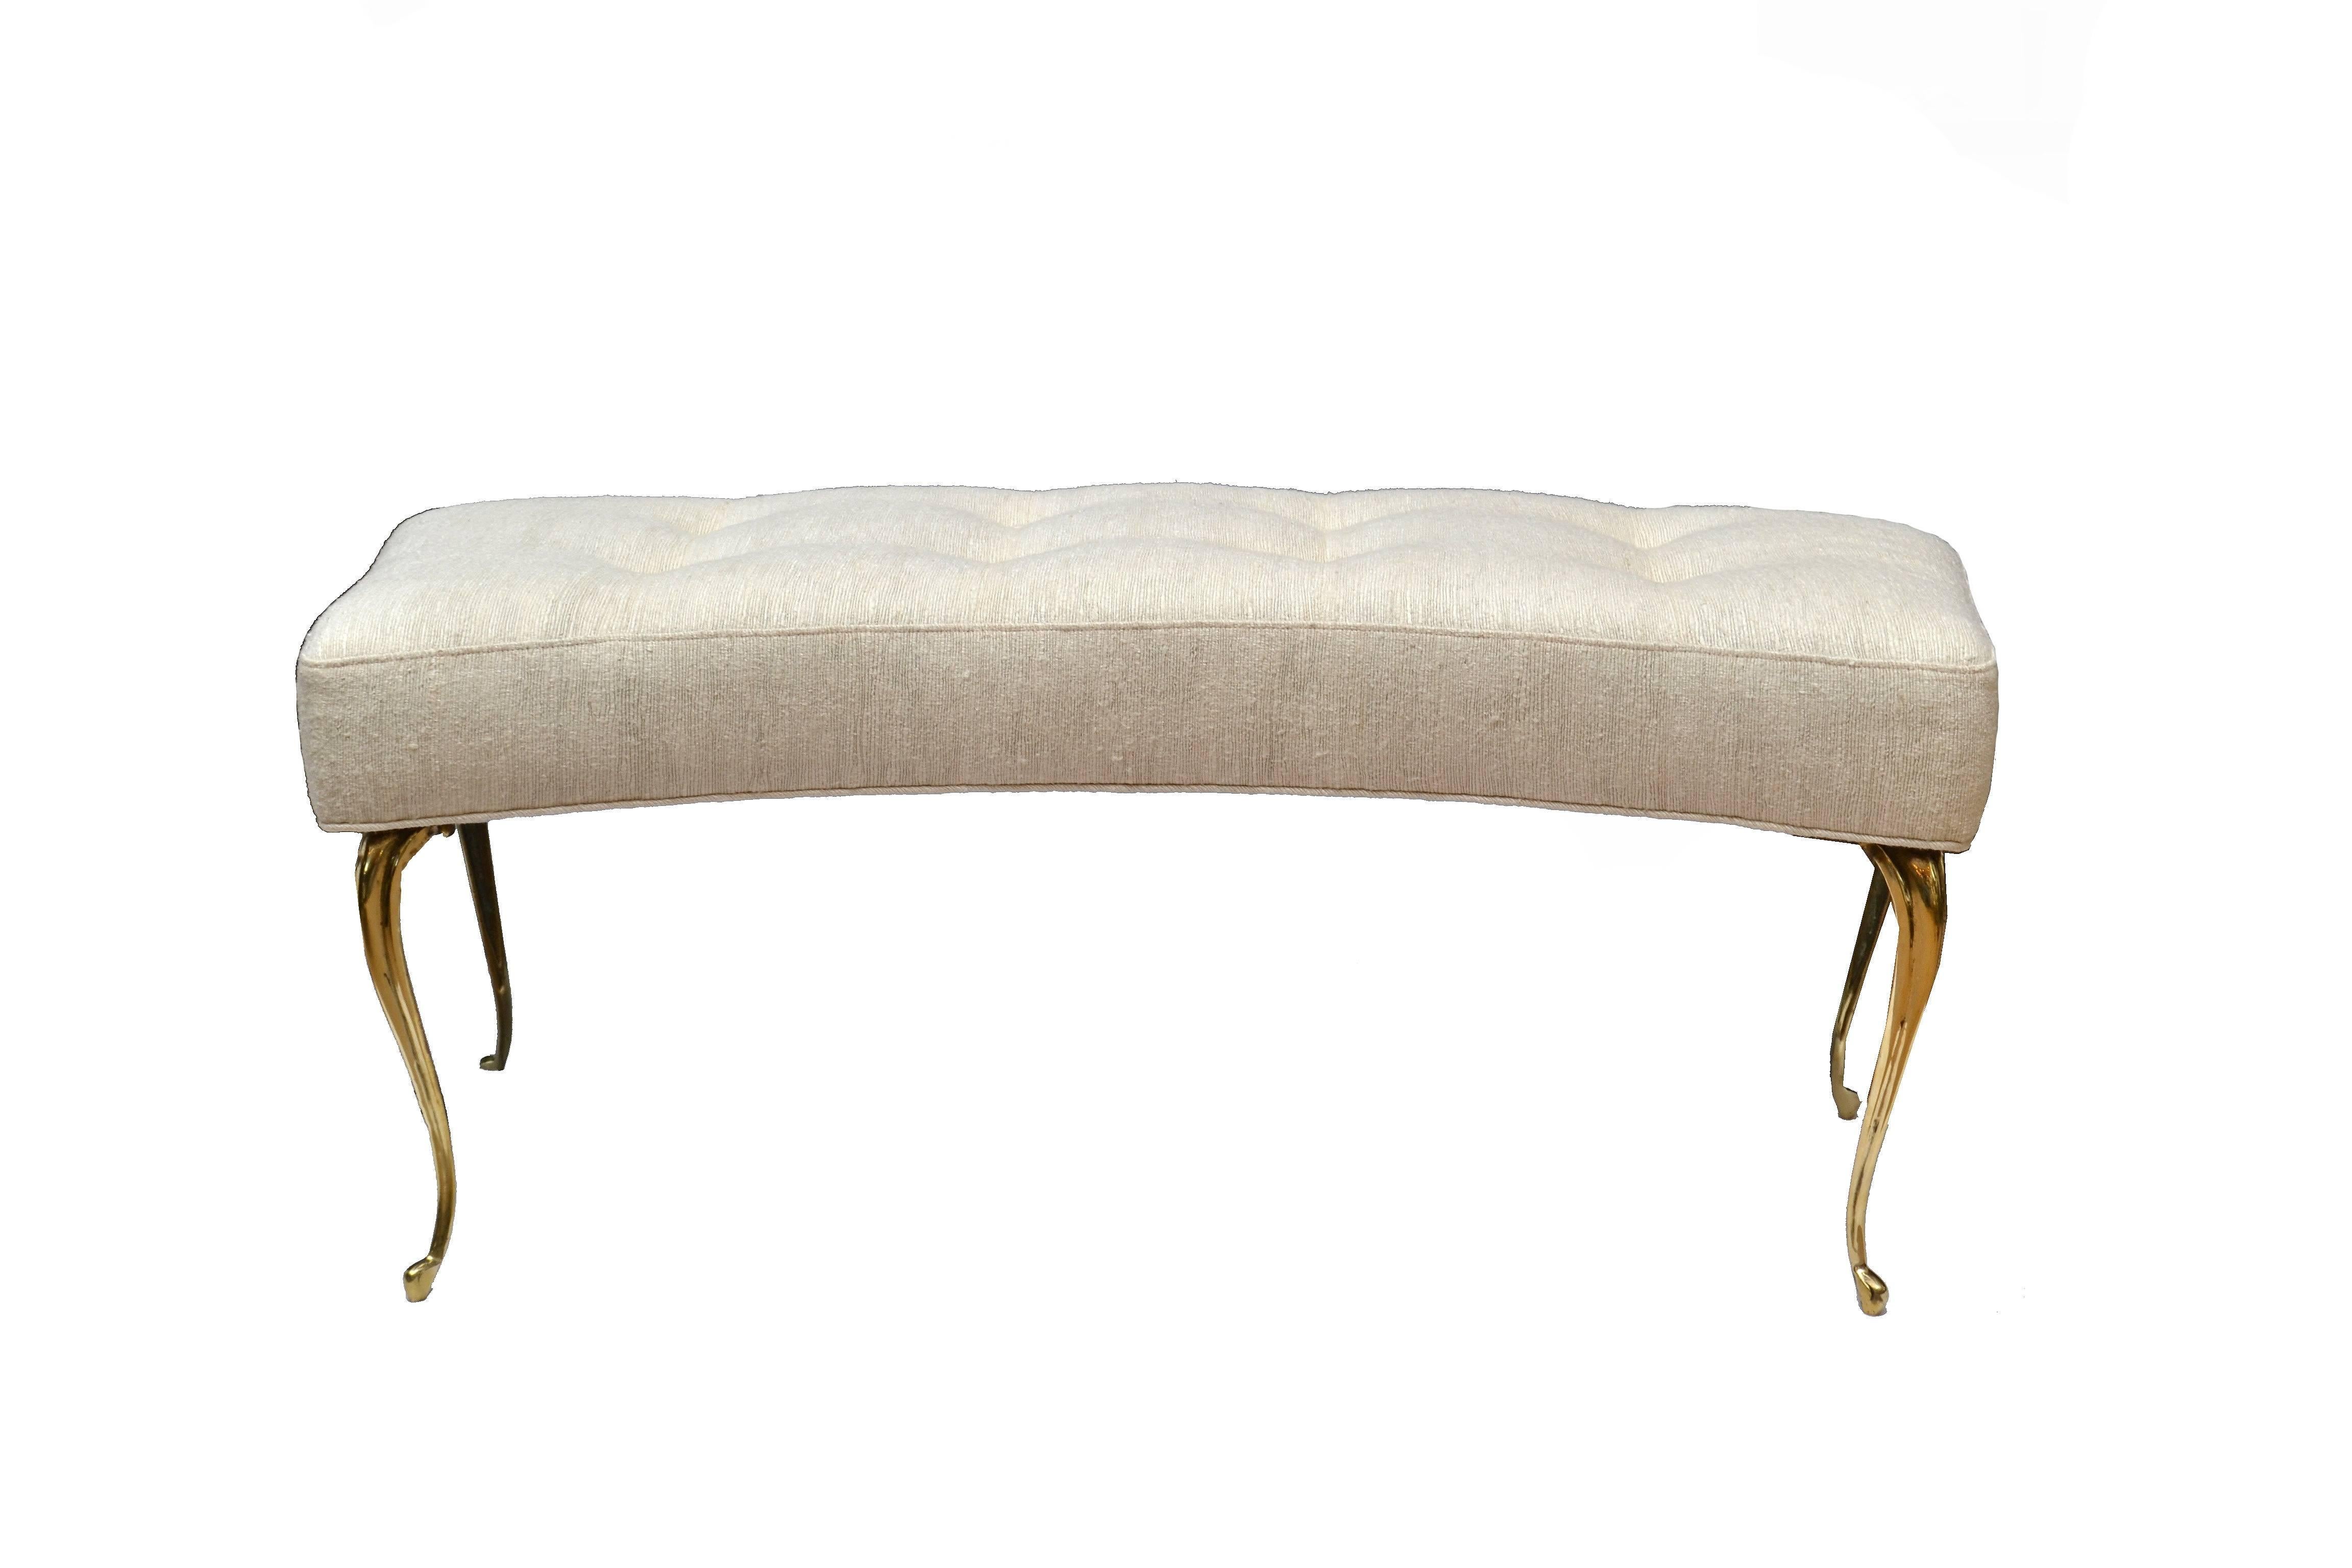 Italian curved bench in beige fabric tapered with brass legs.
This bench is newly upholstered and ready for a new home.
 